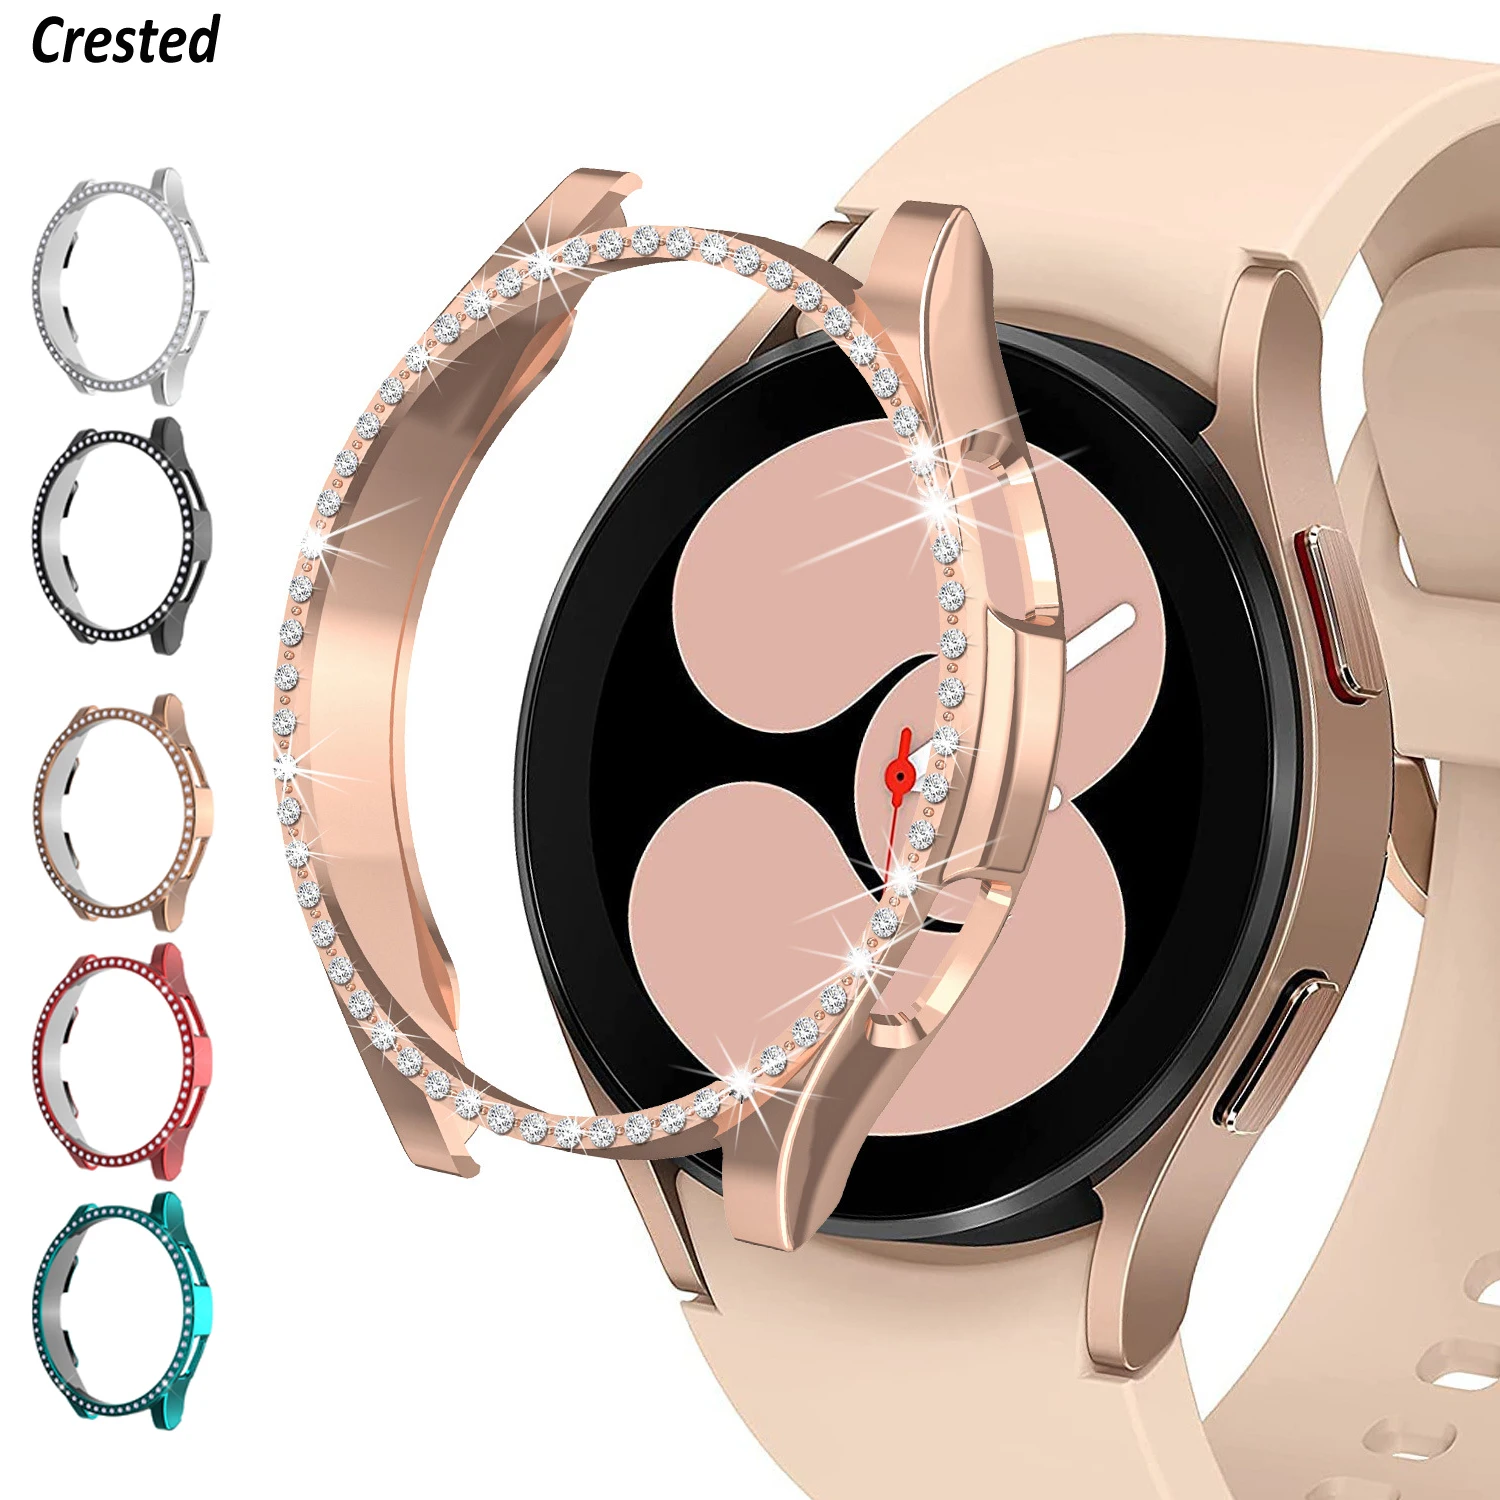 Cover for Samsung Galaxy Watch 4 Case 40mm 44mm Accessories Bling Diamond PC bumper Galaxy Watch 4 Classic 46mm 42mm Protector